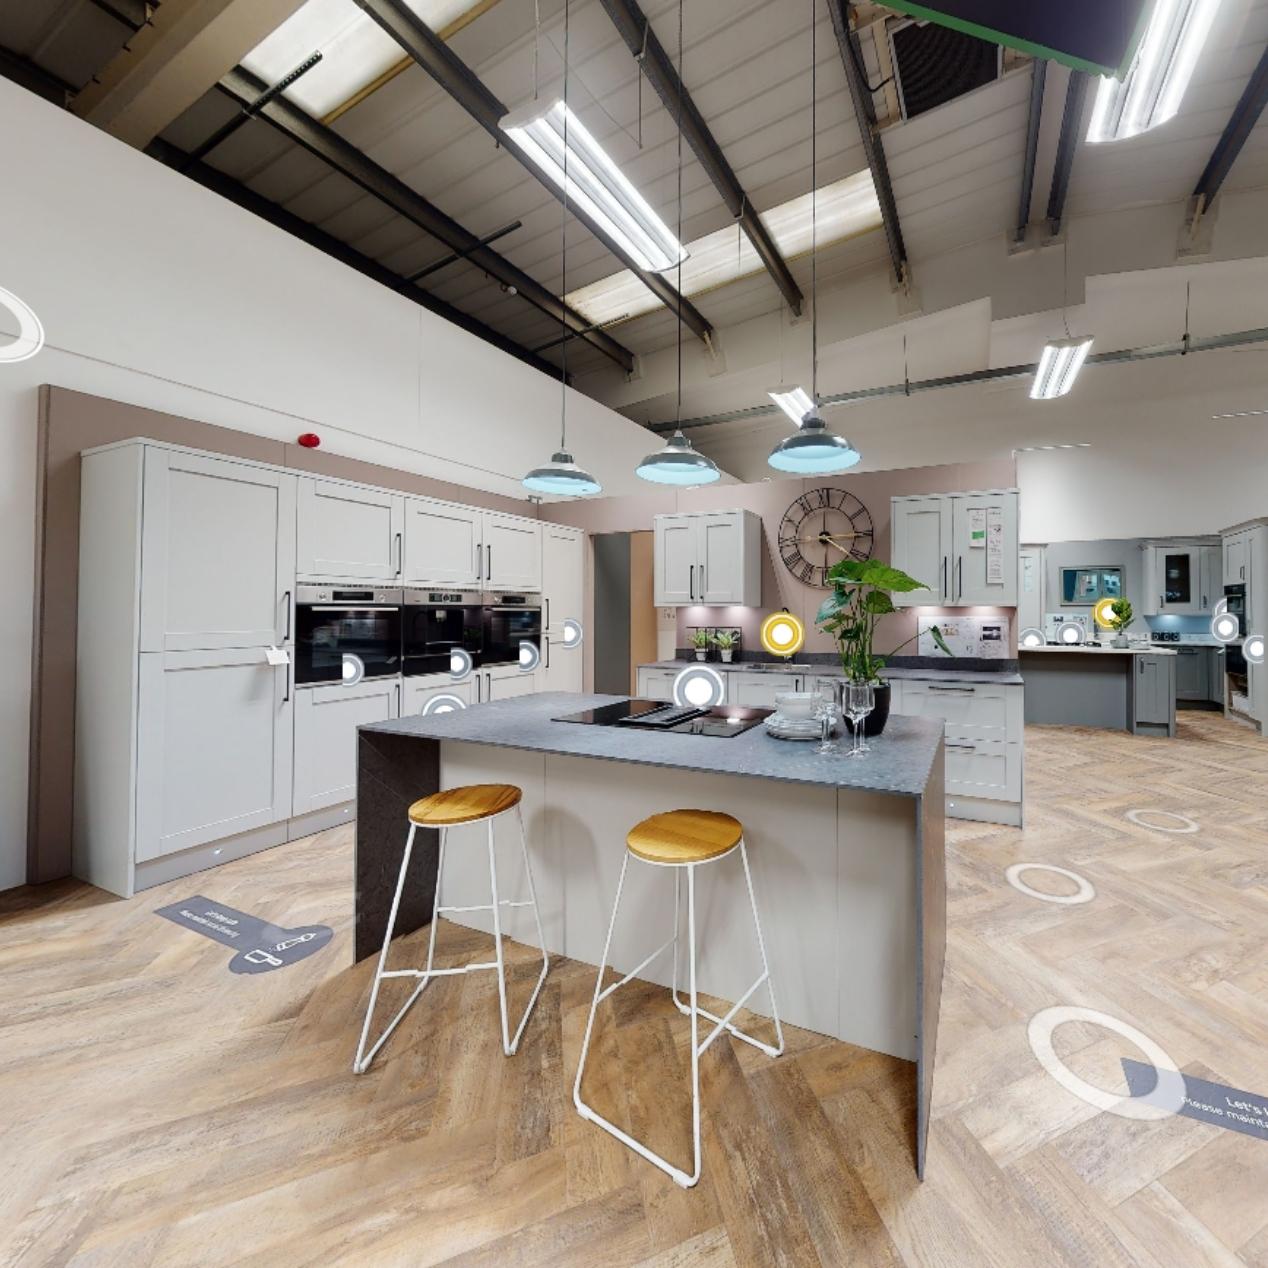 Explore our kitchen showroom